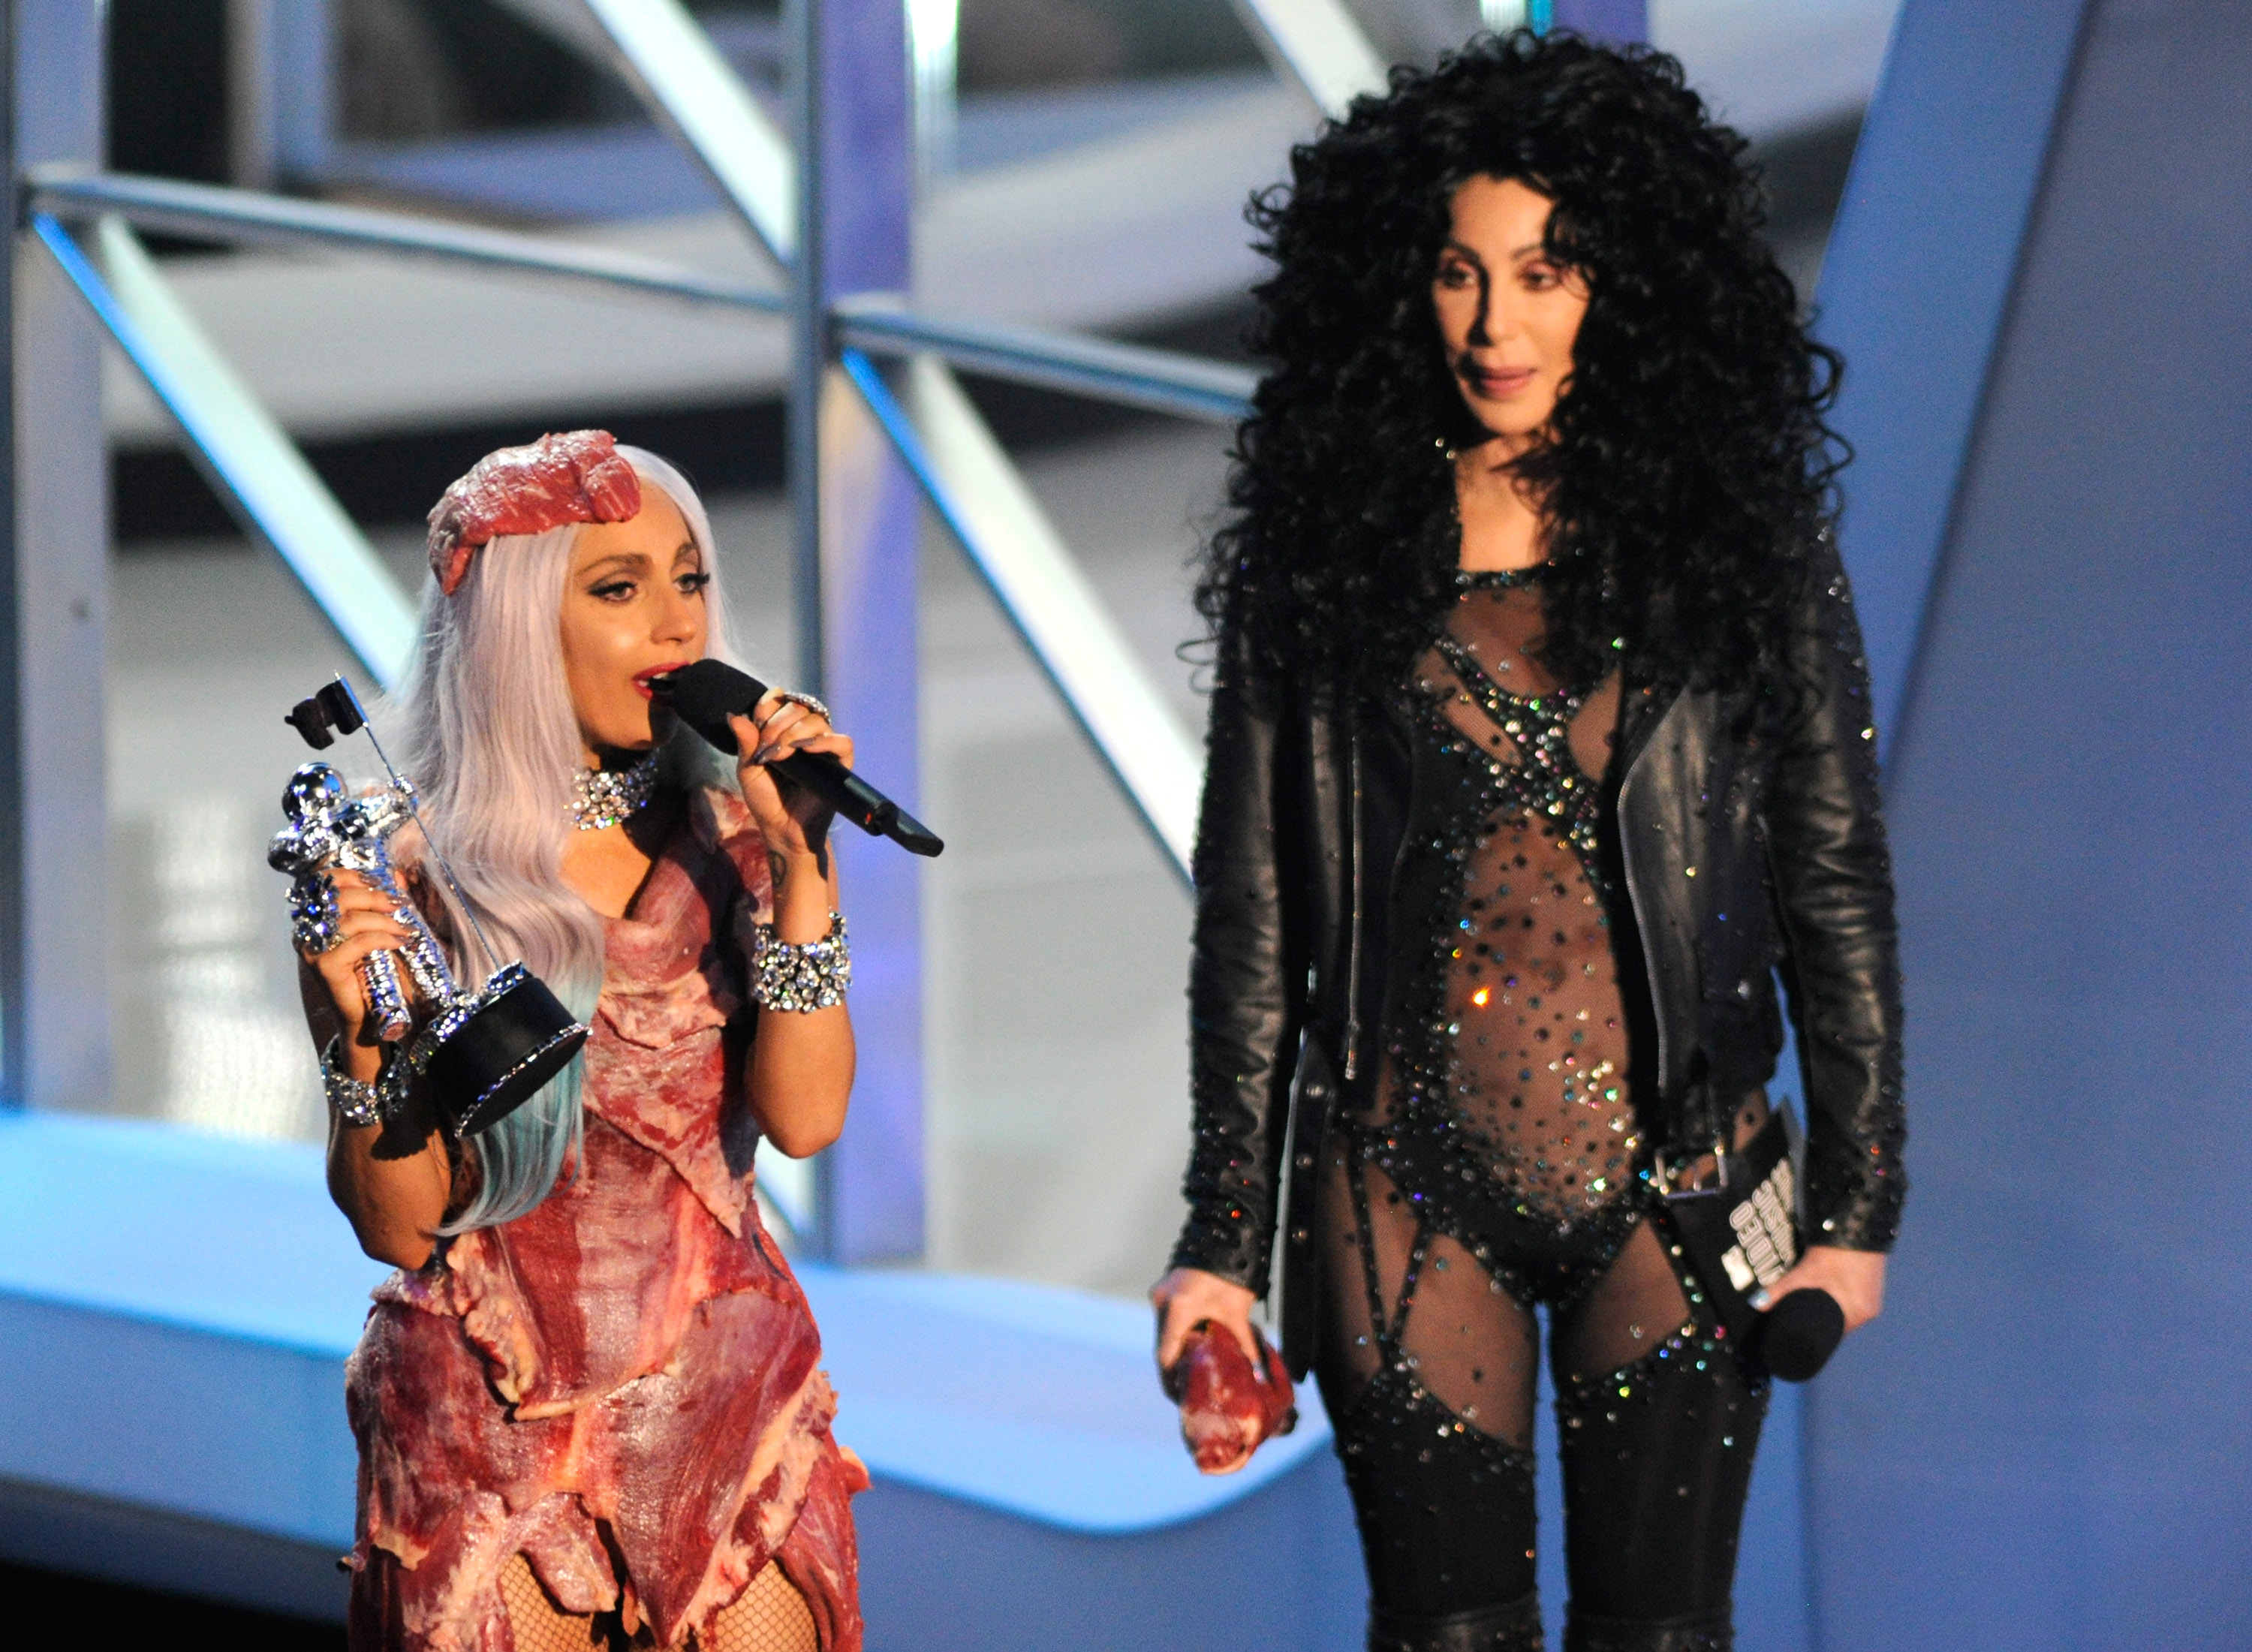 Lady Gaga in a meat dress next to Cher